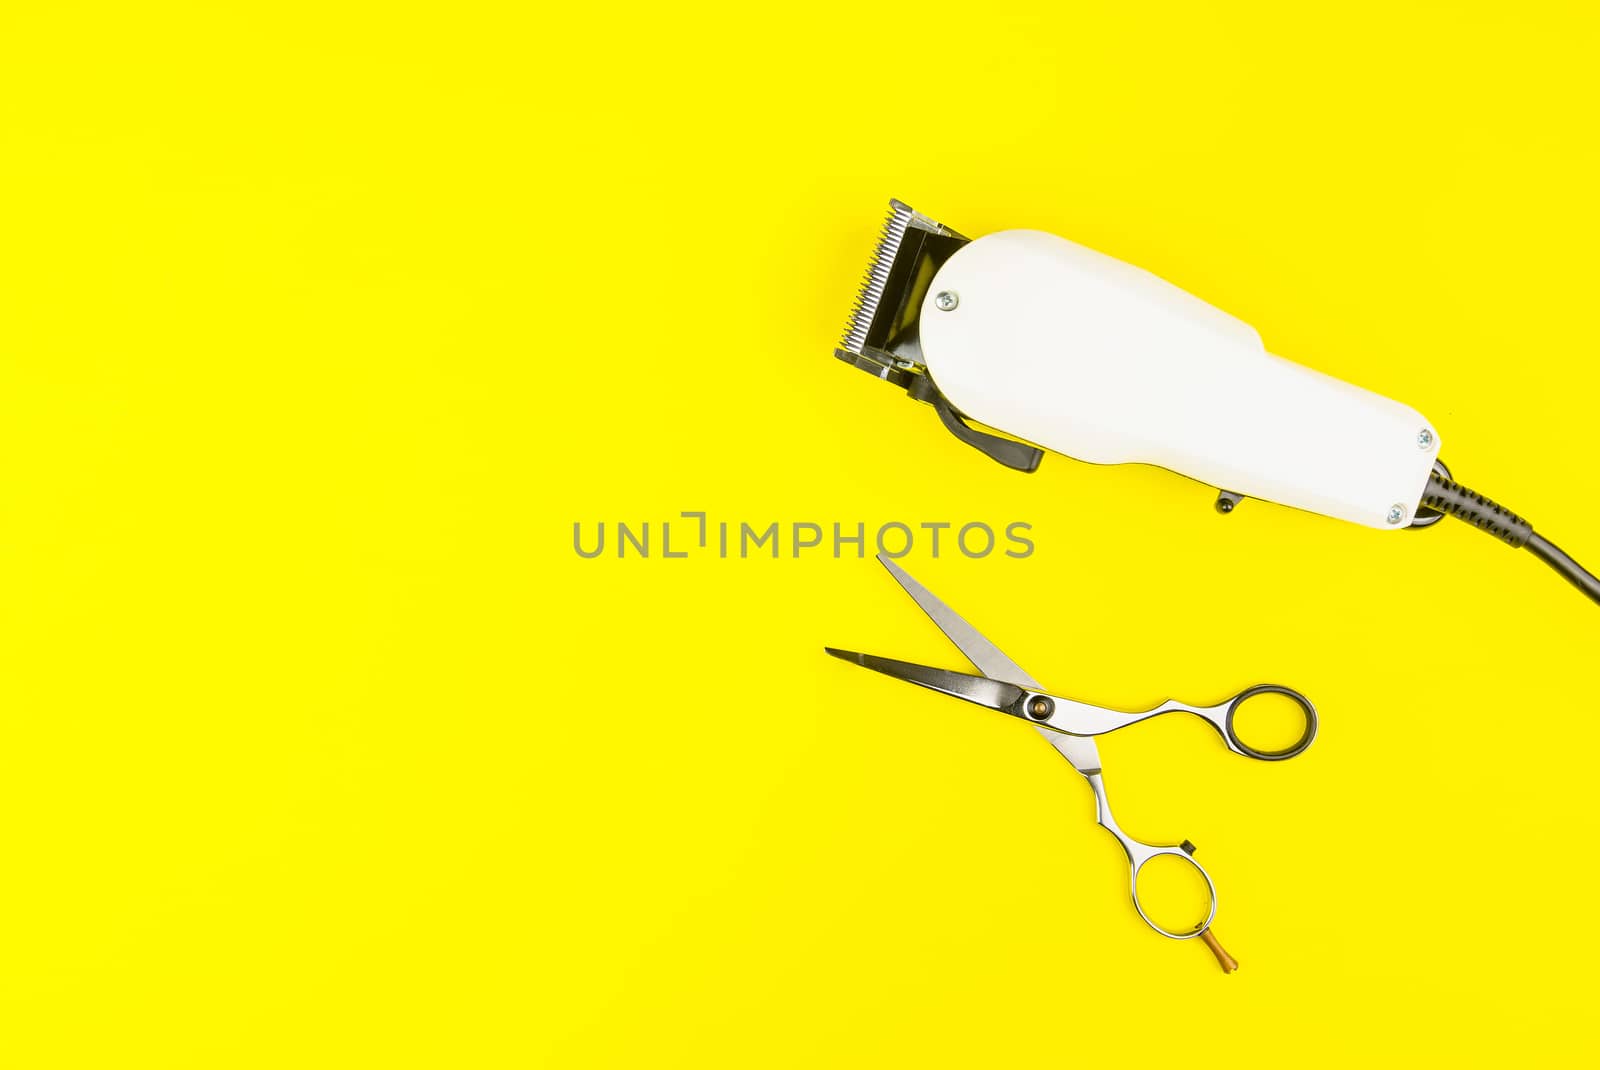 Stylish Professional Barber Scissors and White electric clippers on yellow background. Hairdresser salon concept, Hairdressing Set. Haircut accessories. Copy space image, flat lay